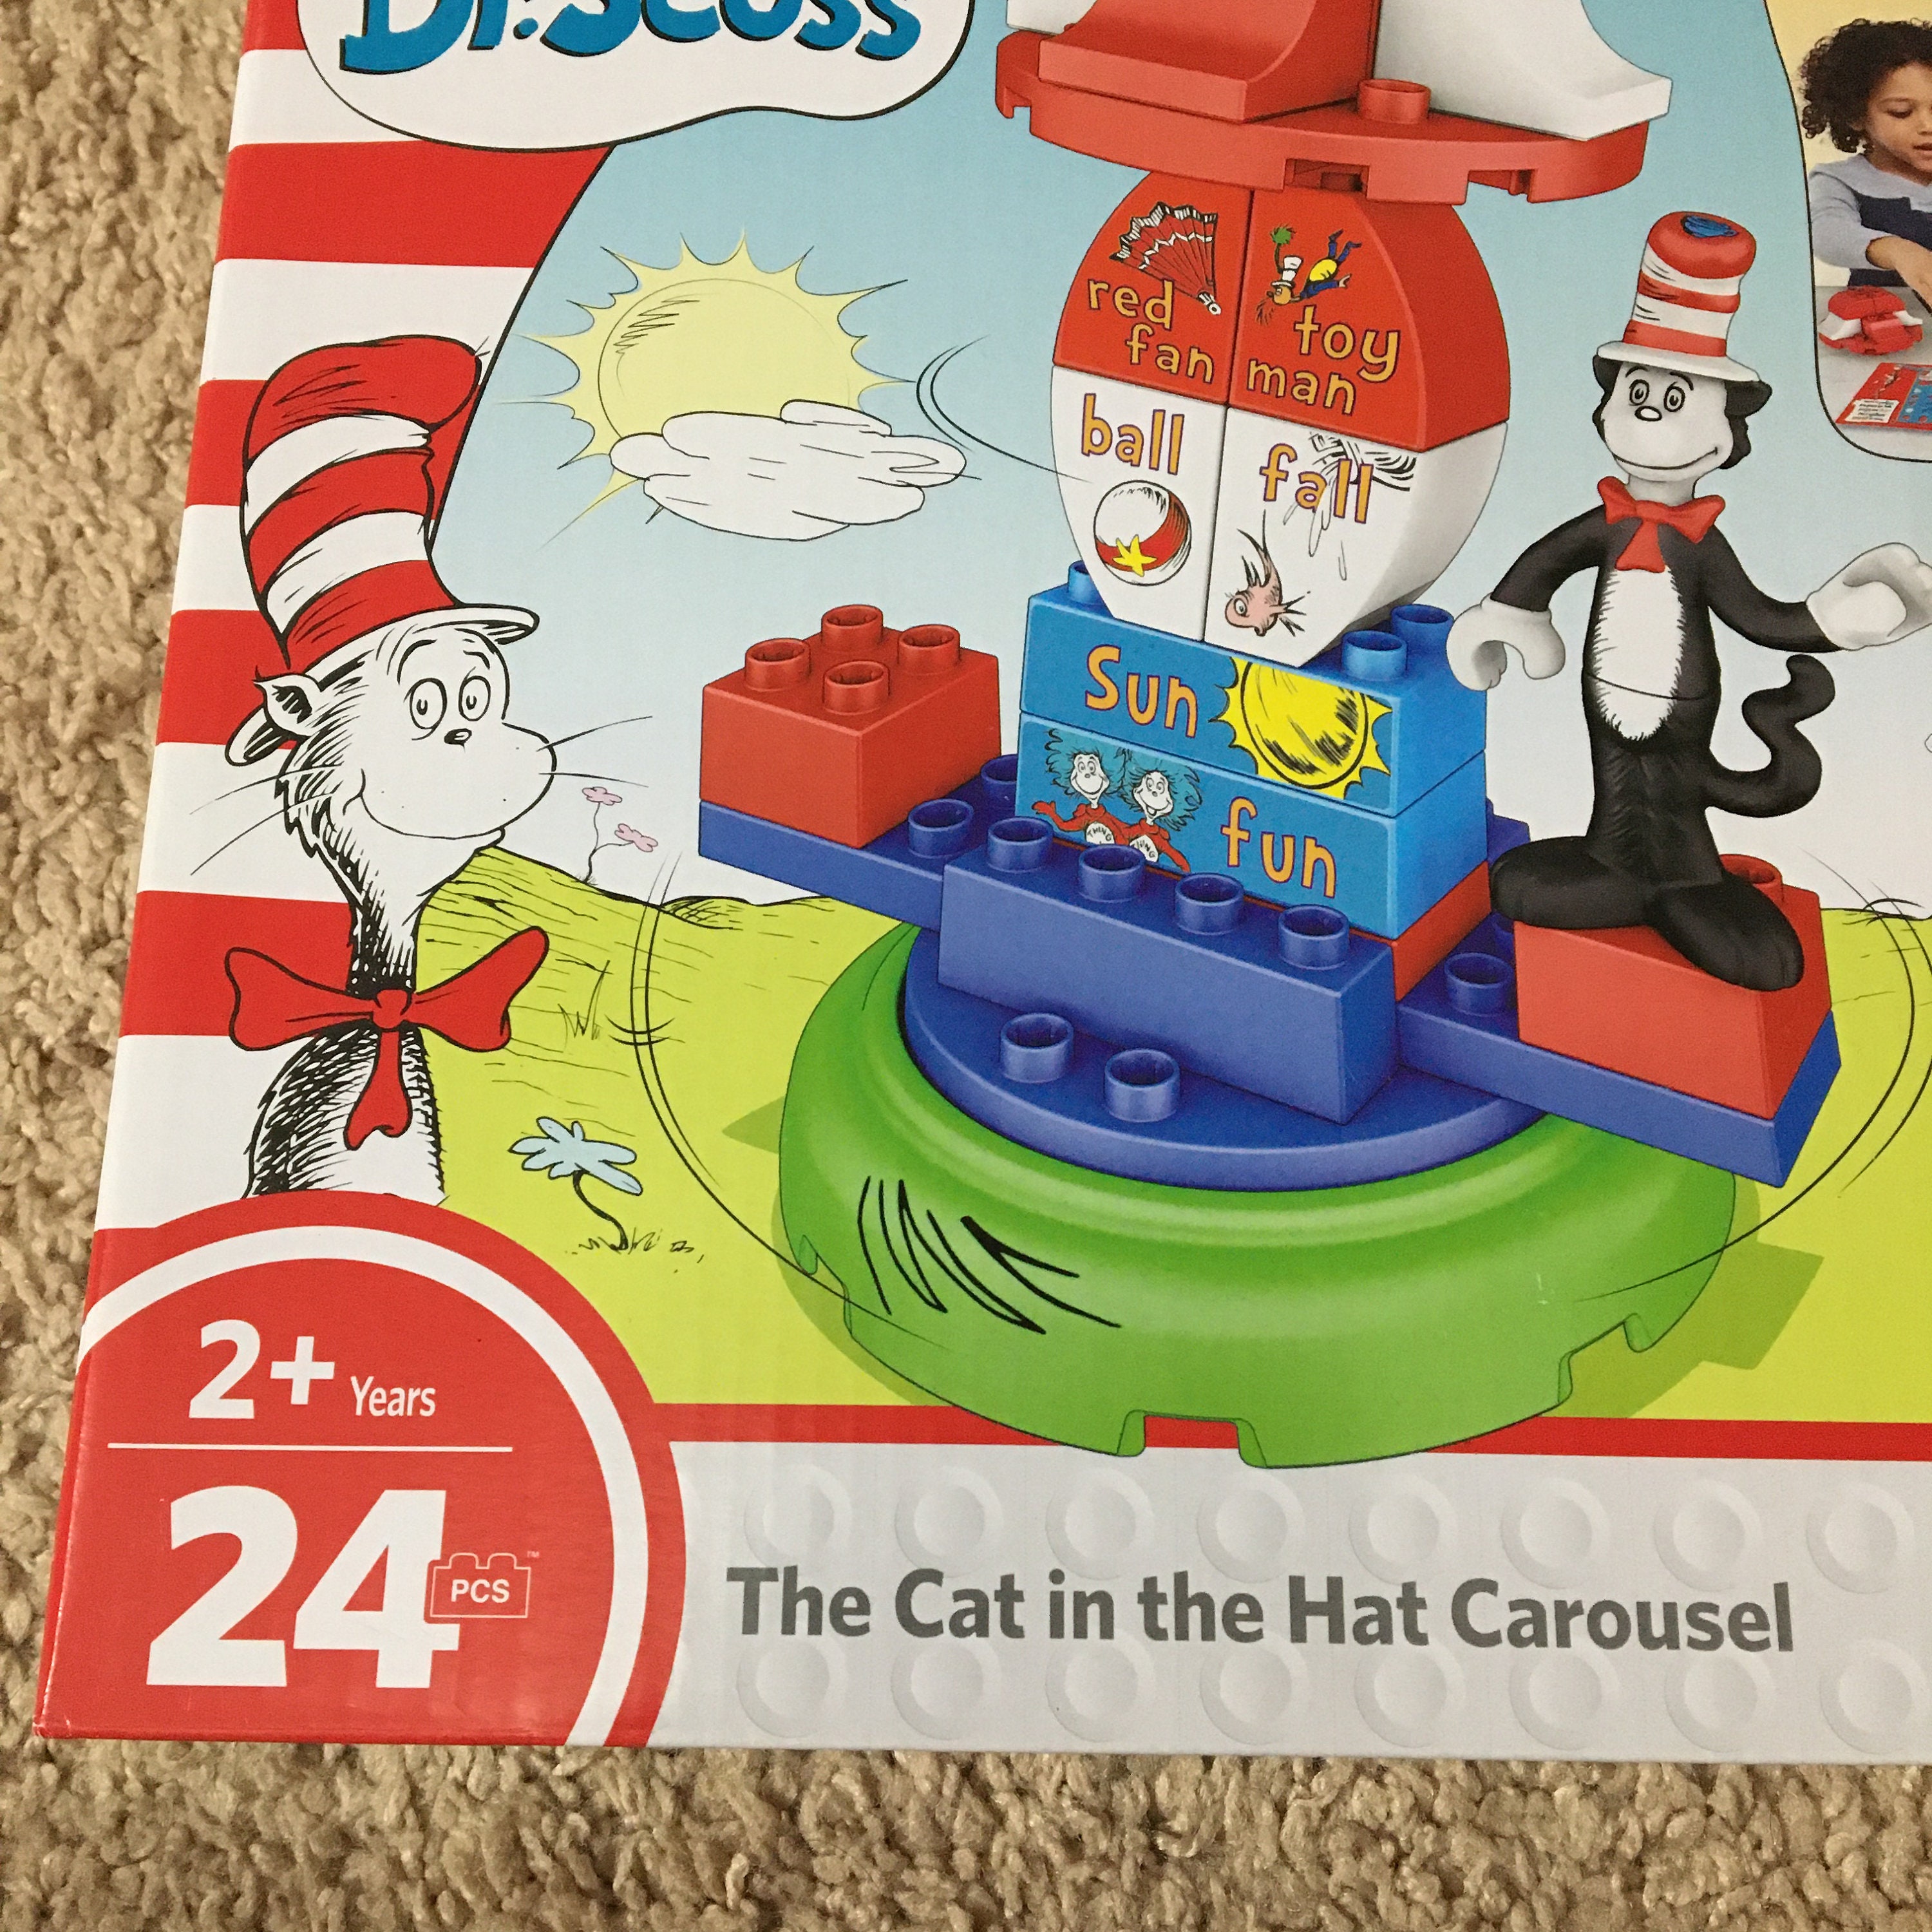  Funko Dr. Seuss Stack with The Cat Game : Toys & Games